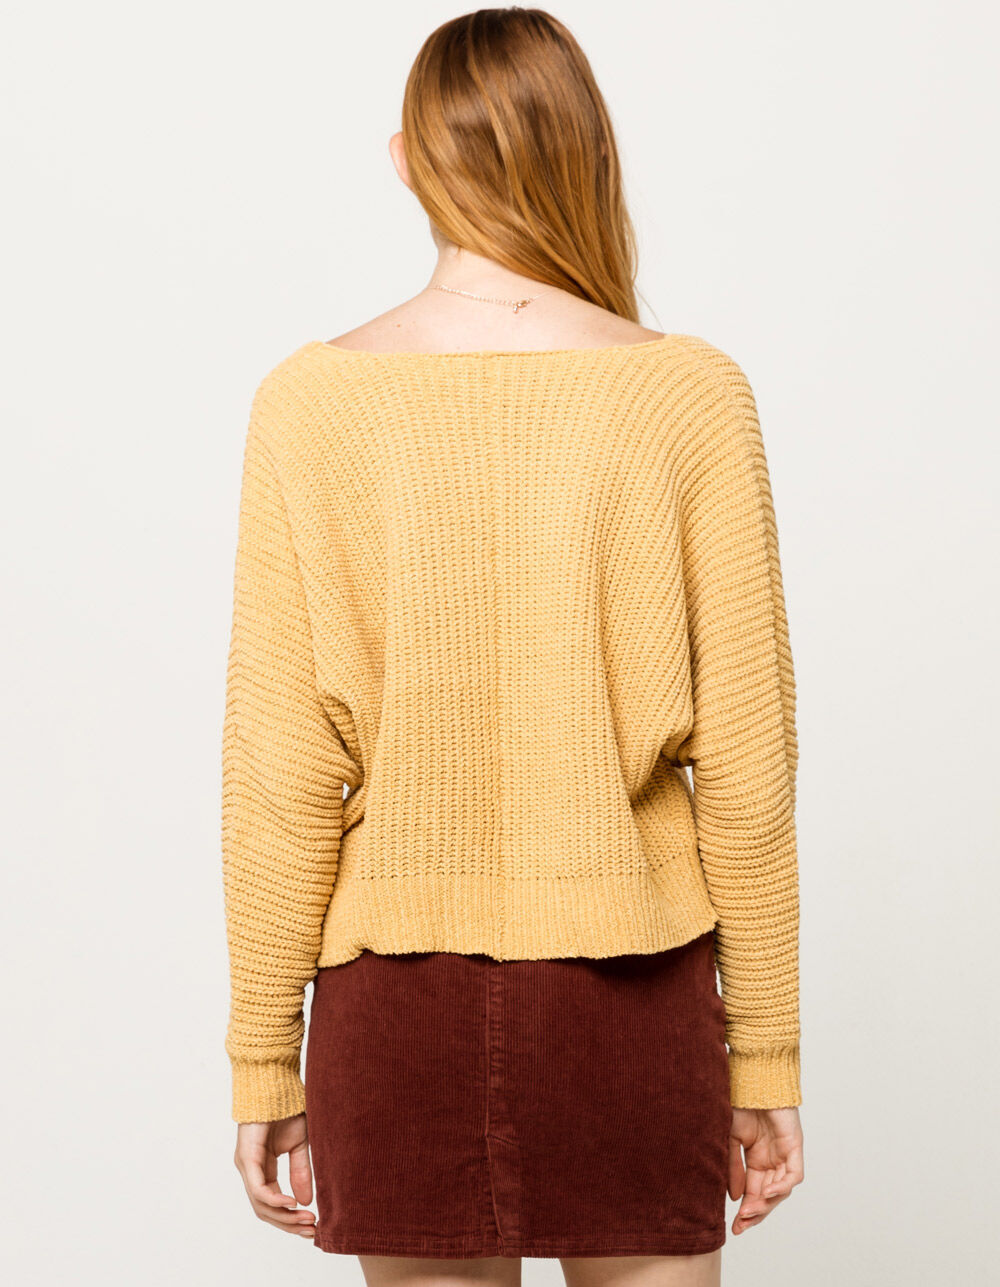 SKY AND SPARROW Matte Chenille V-Neck Yellow Womens Dolman Sweater image number 3